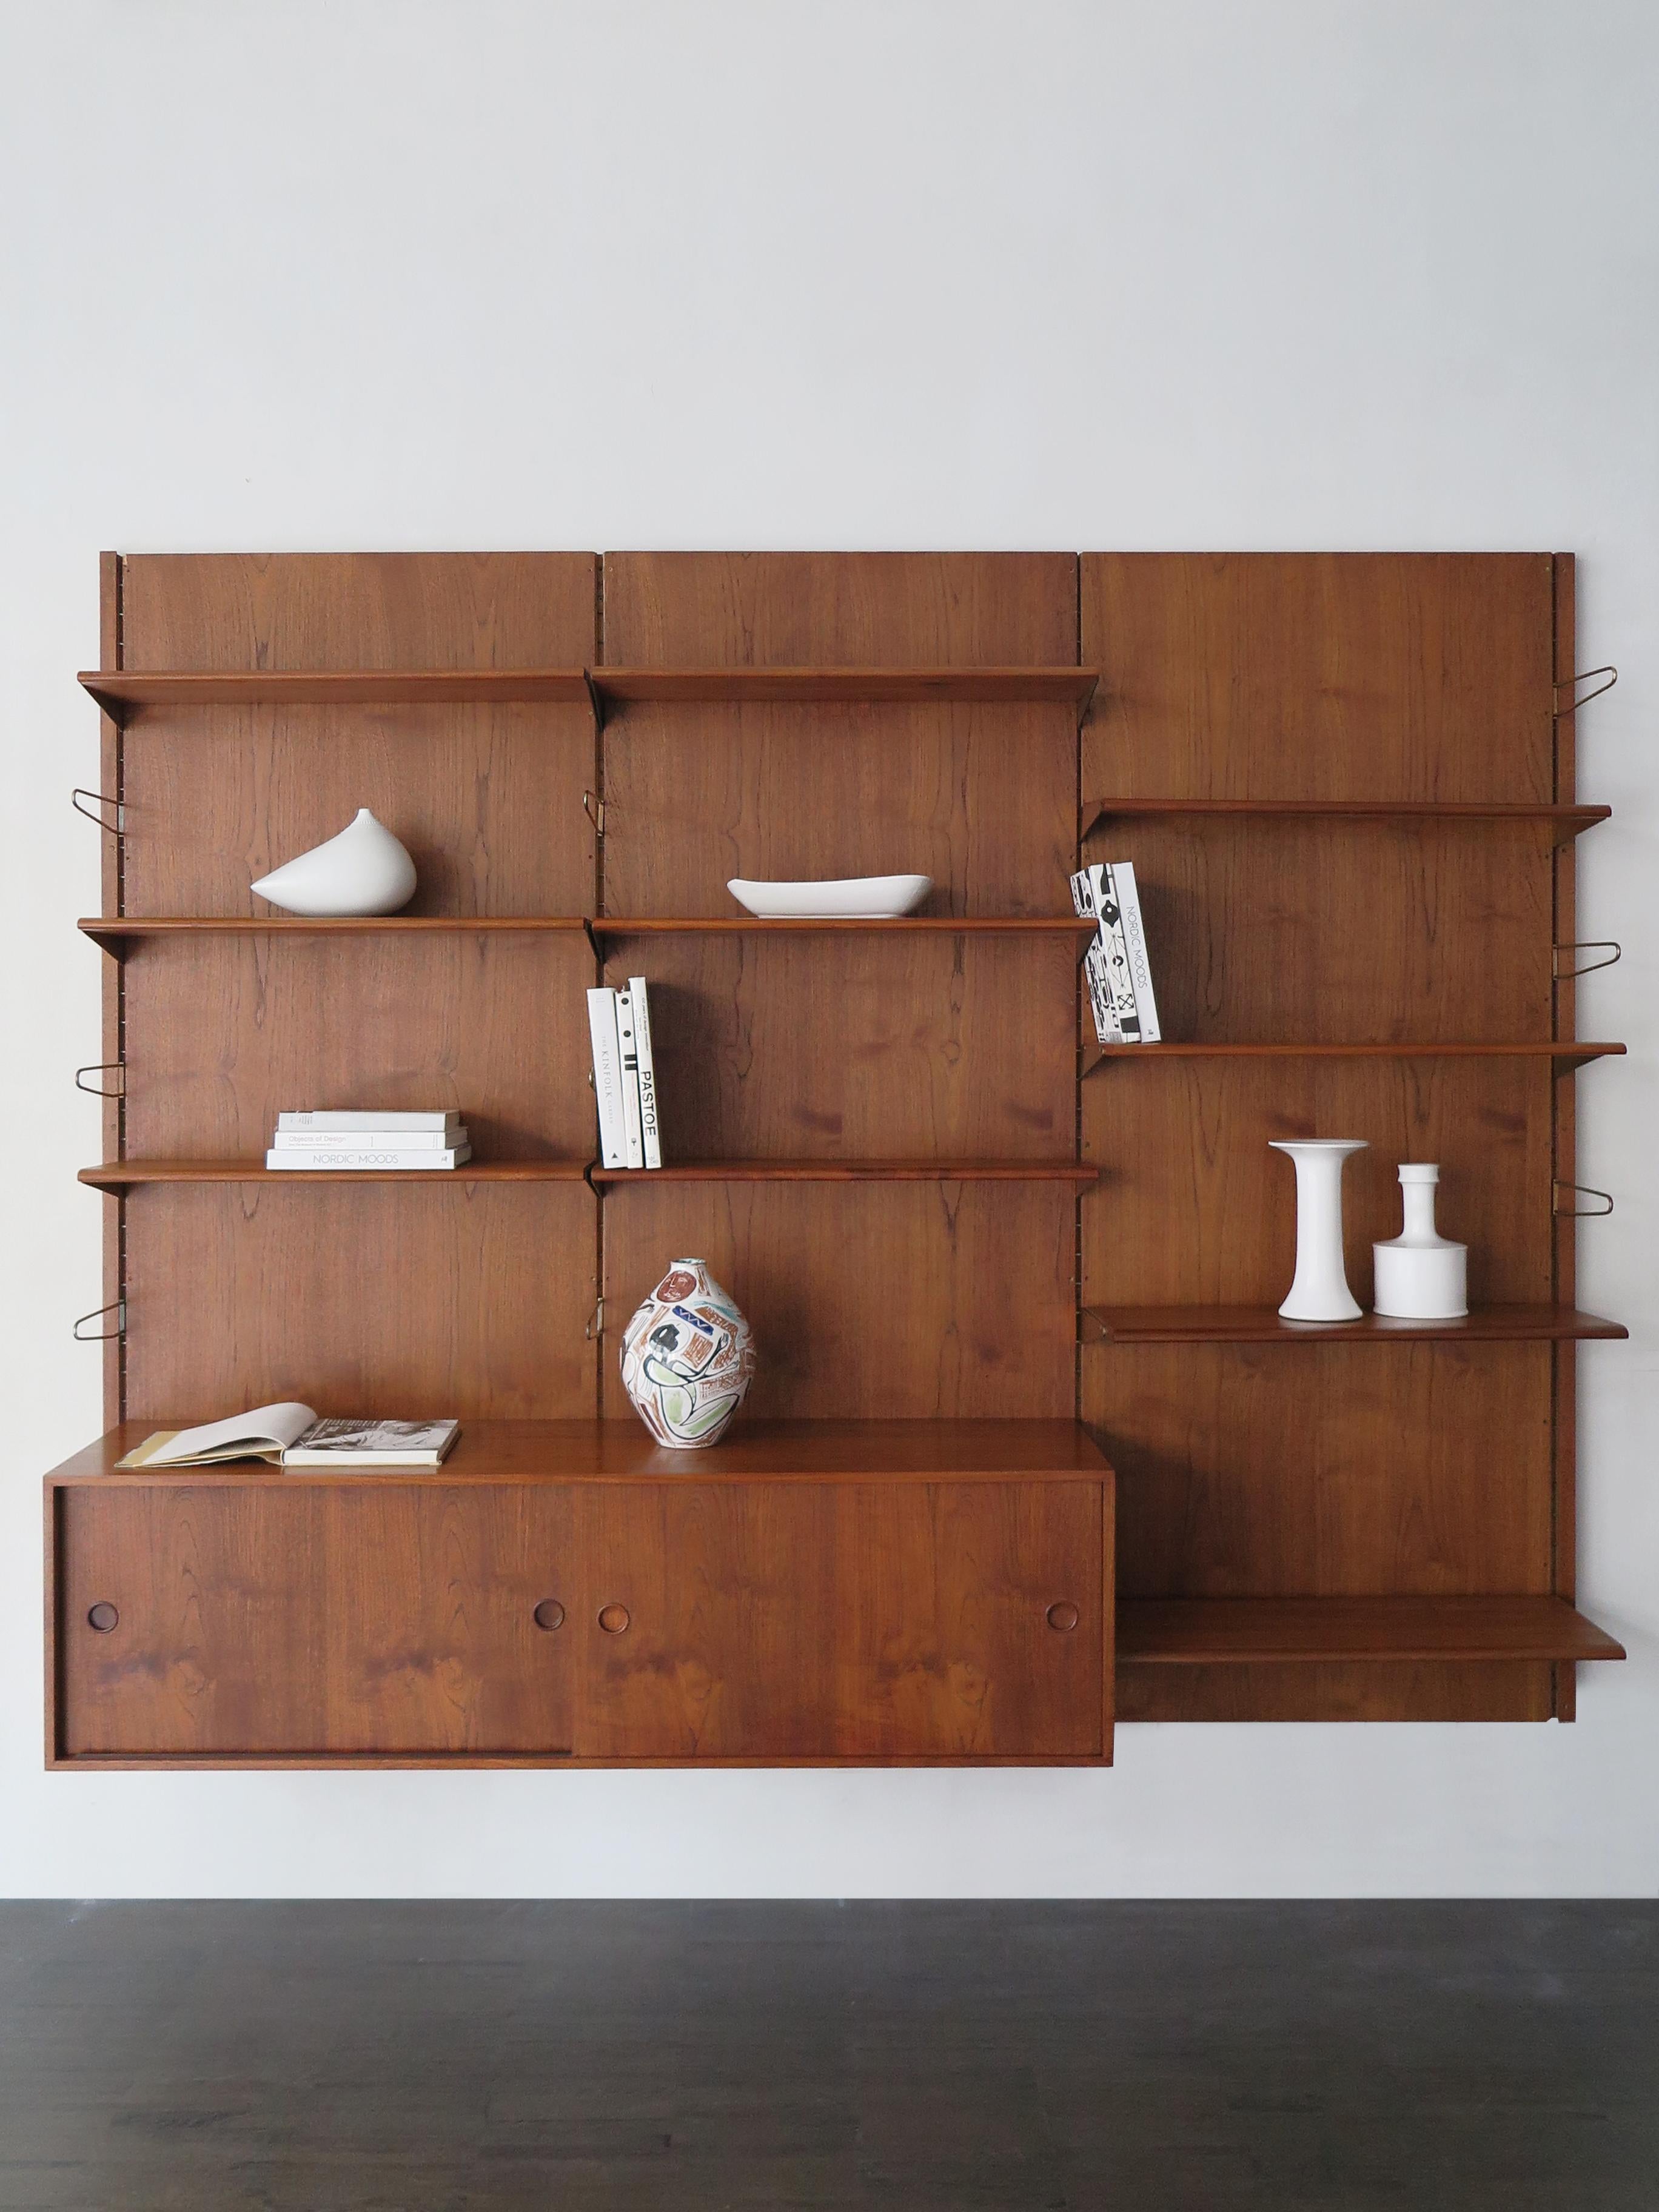 Scandinavian teak bookcase shelves or panel system designed by Finn Juhl and produced by Bovirke composed of 10 shelves and 1 container with sliding doors, both the shelves and the container can be positioned as desired, brass details, Denmark